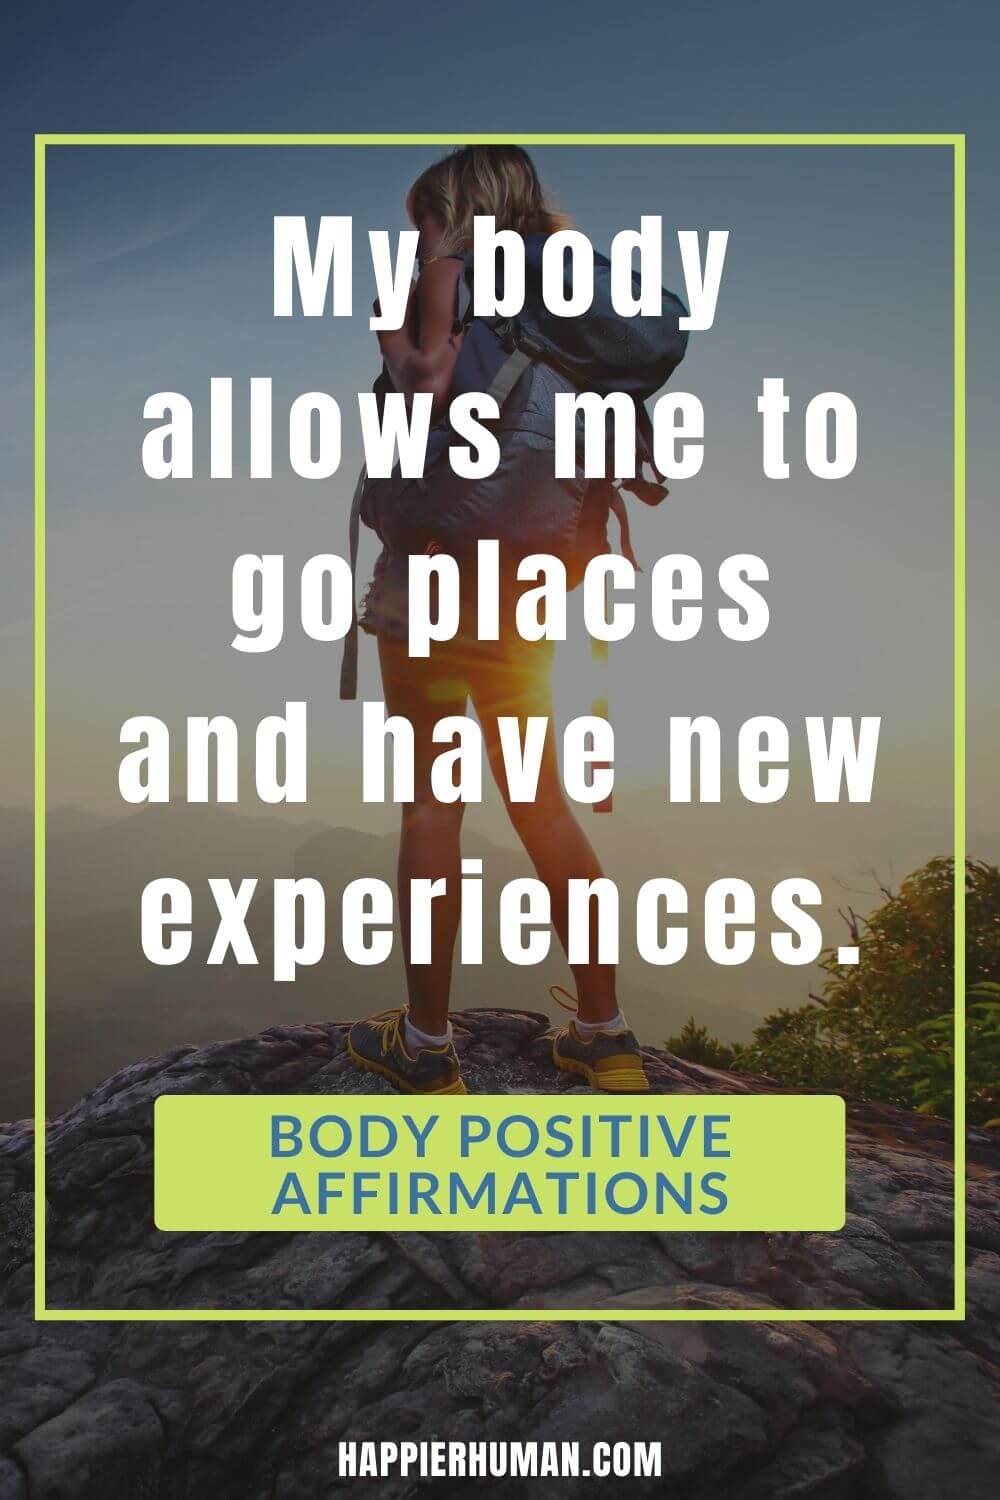 Body Positive Affirmations - My body allows me to go places and have new experiences. | body positive promises | body positive affirmation cards | body affirmations